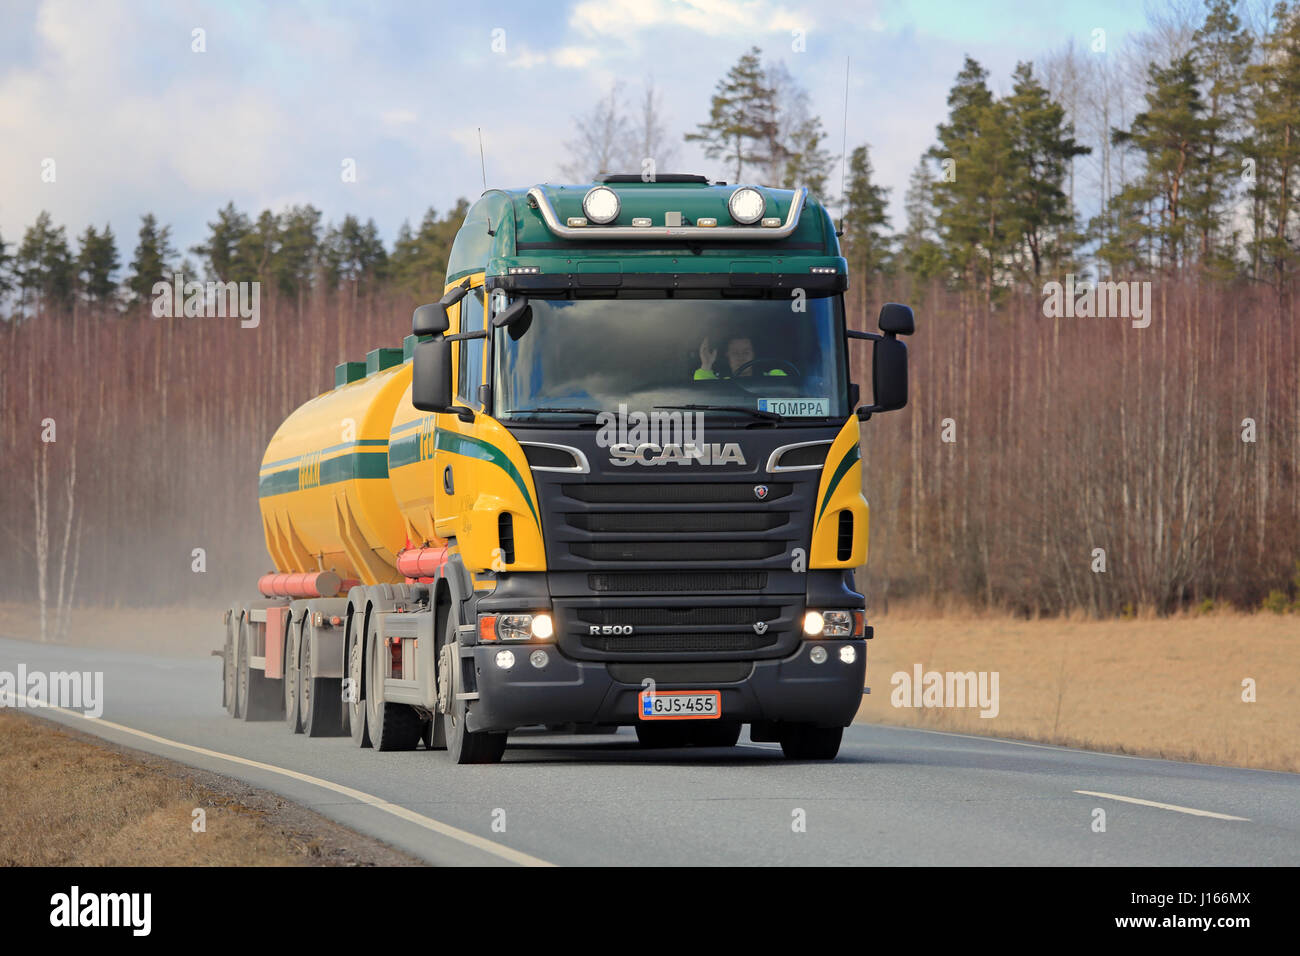 SALO, FINLAND - APRIL 1, 2016: Colorful Scania R500 tank truck trucking along rural highway. The driver flashes the high beams briefly. Stock Photo